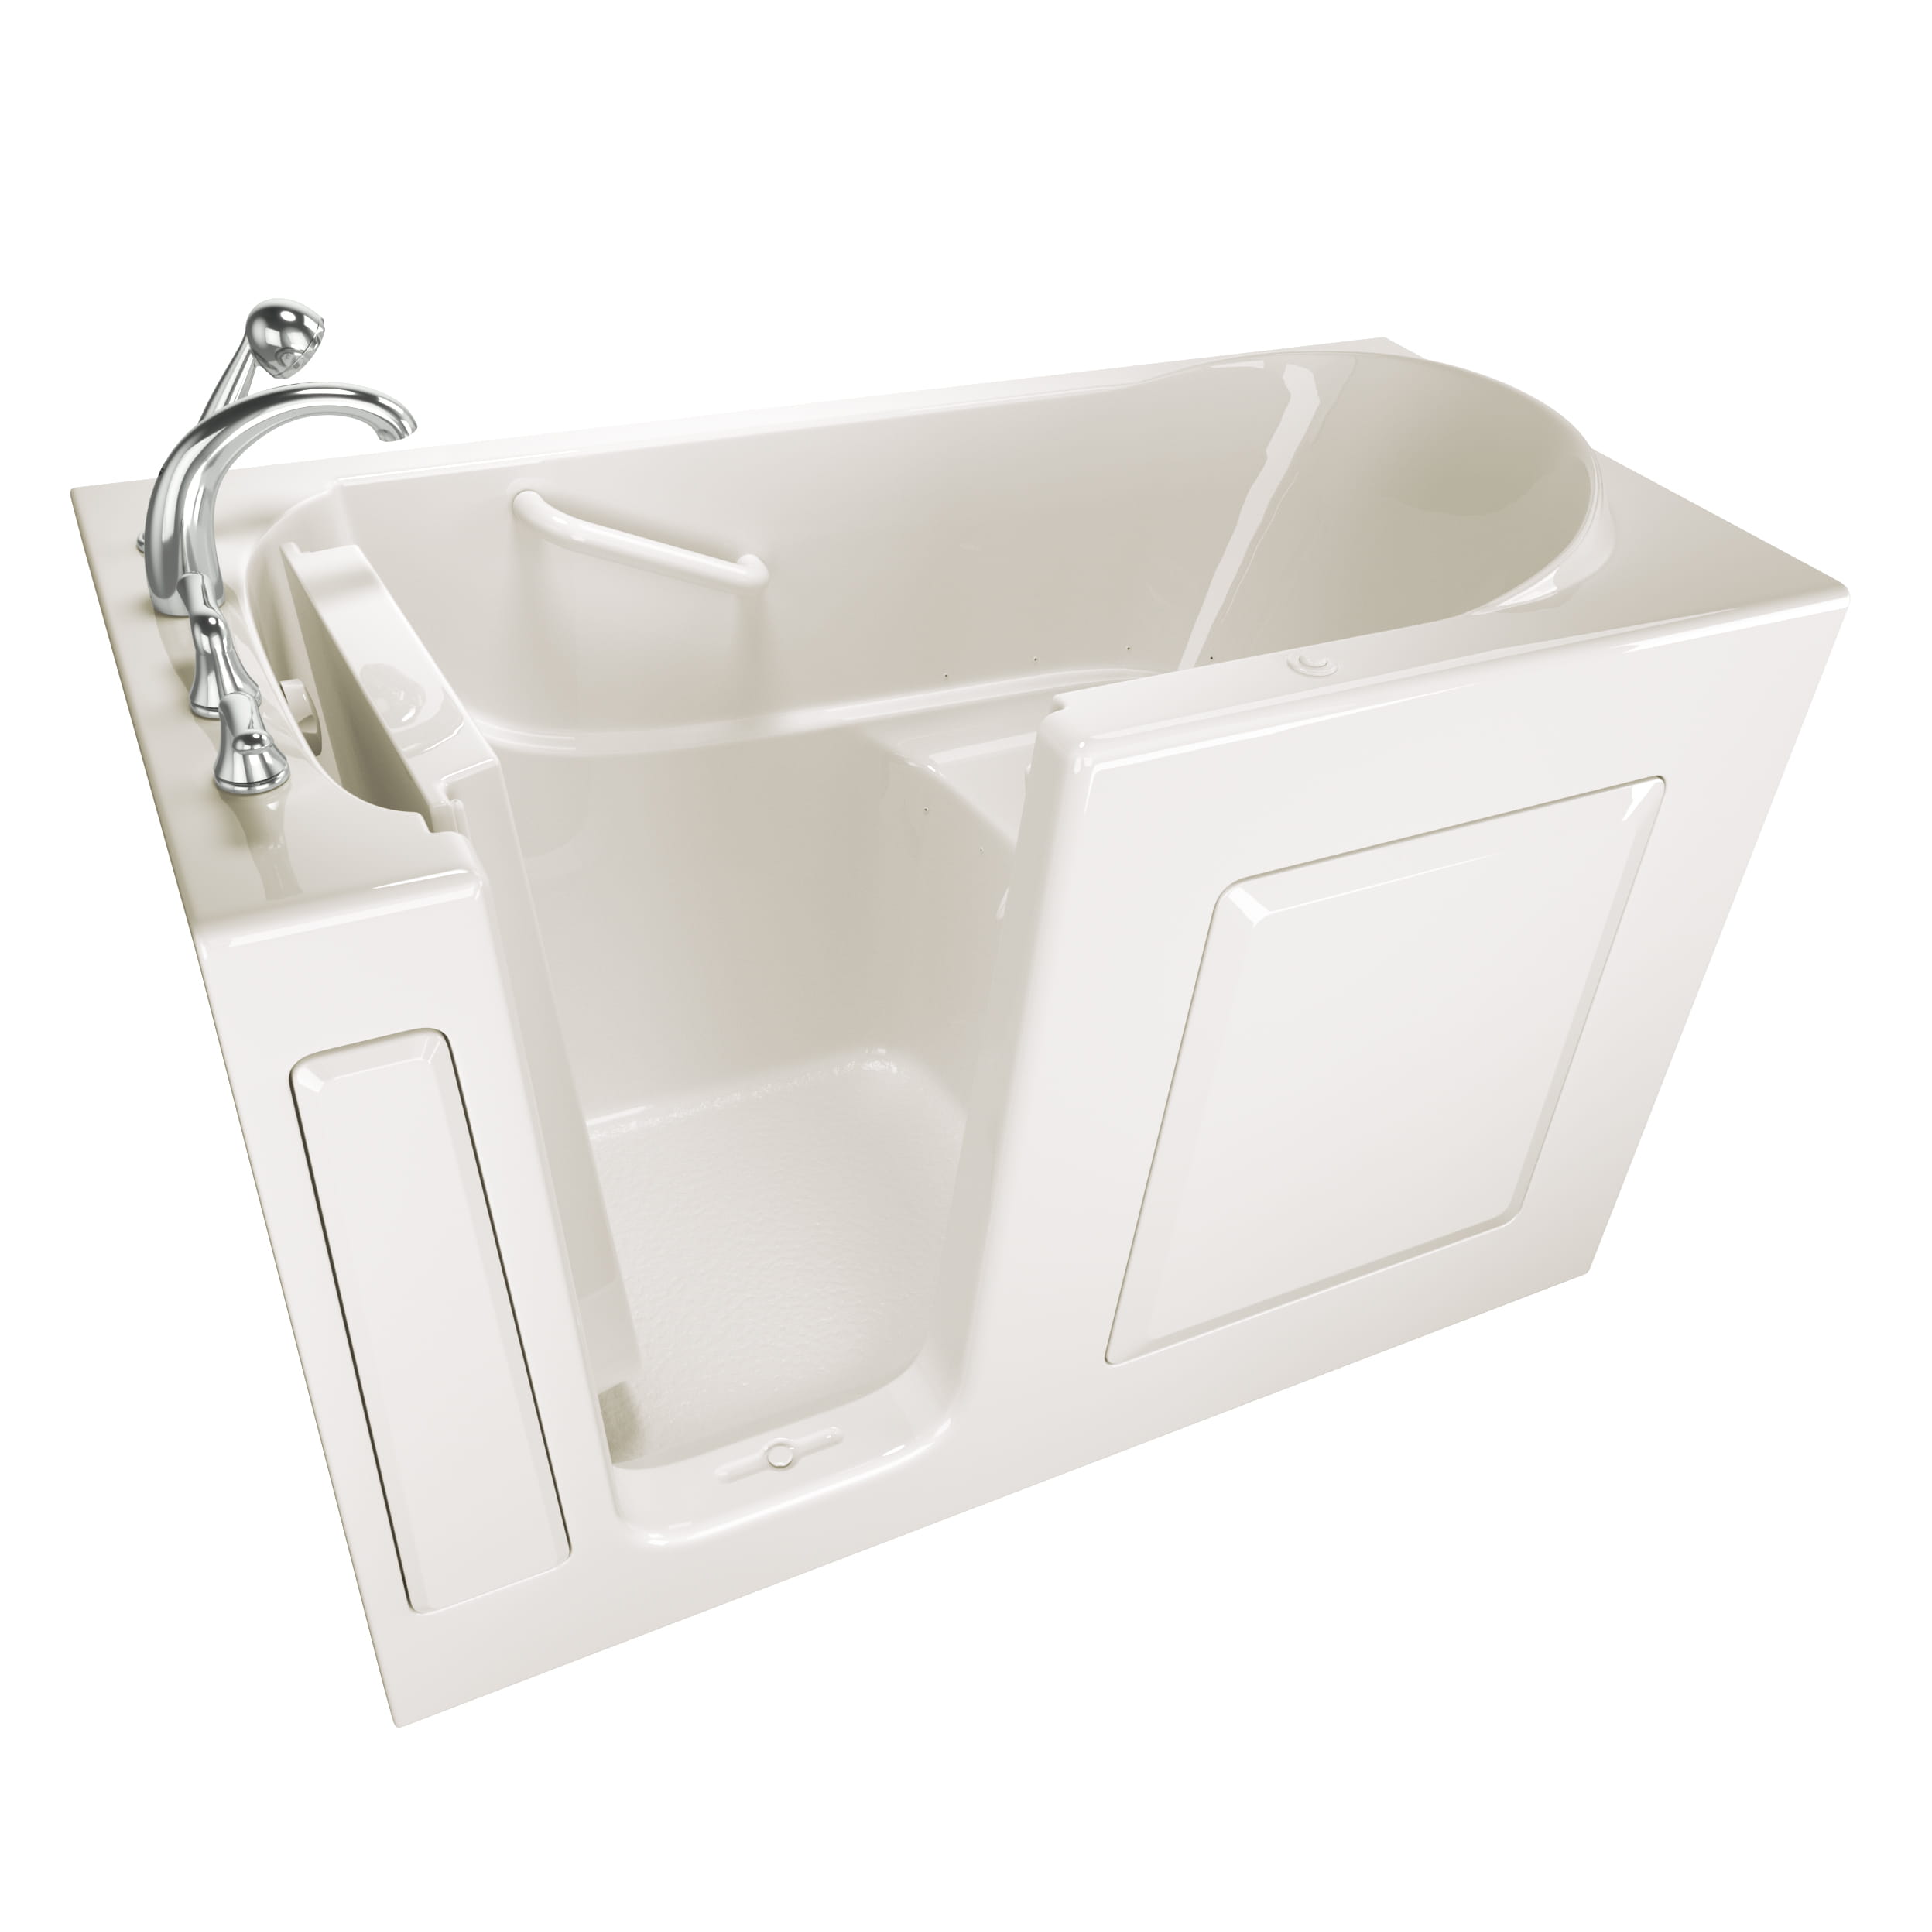 Gelcoat Entry Series 60 x 30-Inch Walk-In Tub With Air Spa System – Left-Hand Drain With Faucet